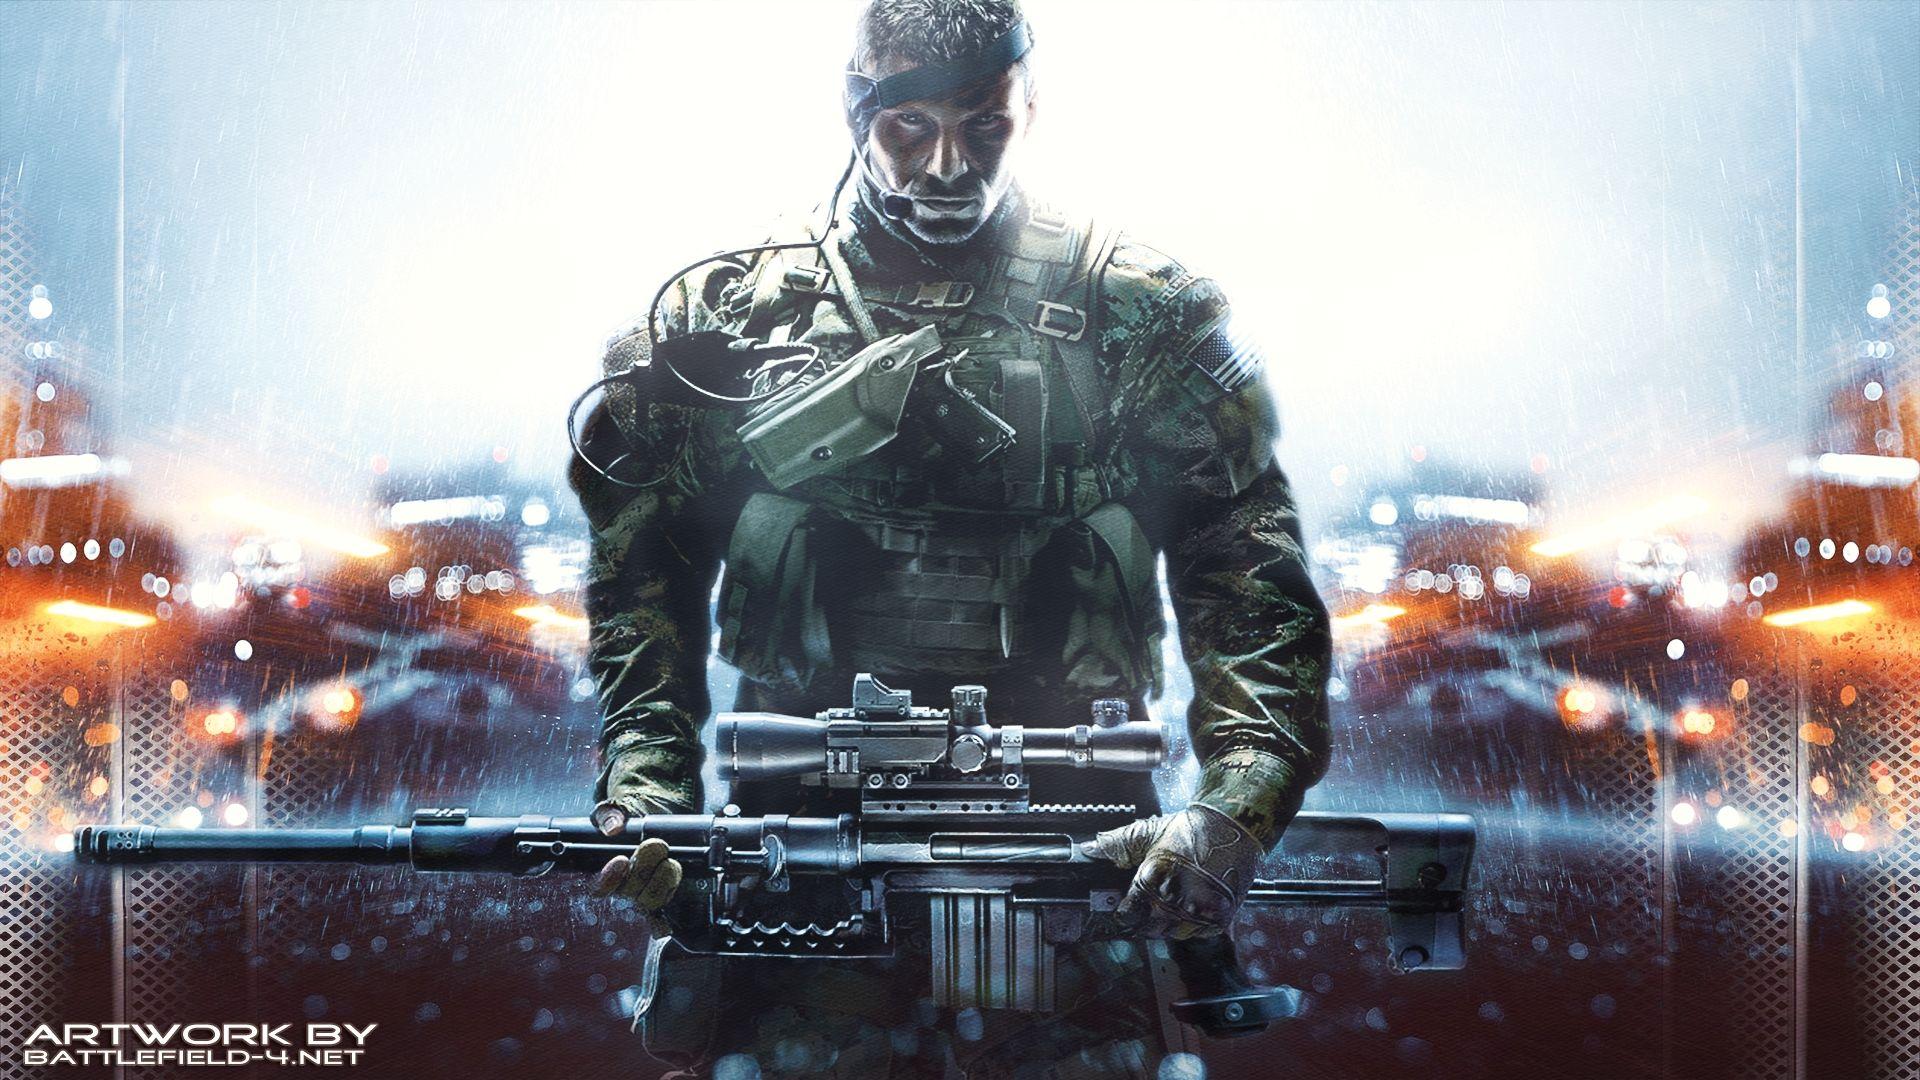 Mobile wallpaper: Battlefield, Soldier, Video Game, Battlefield 4, 1115427  download the picture for free.